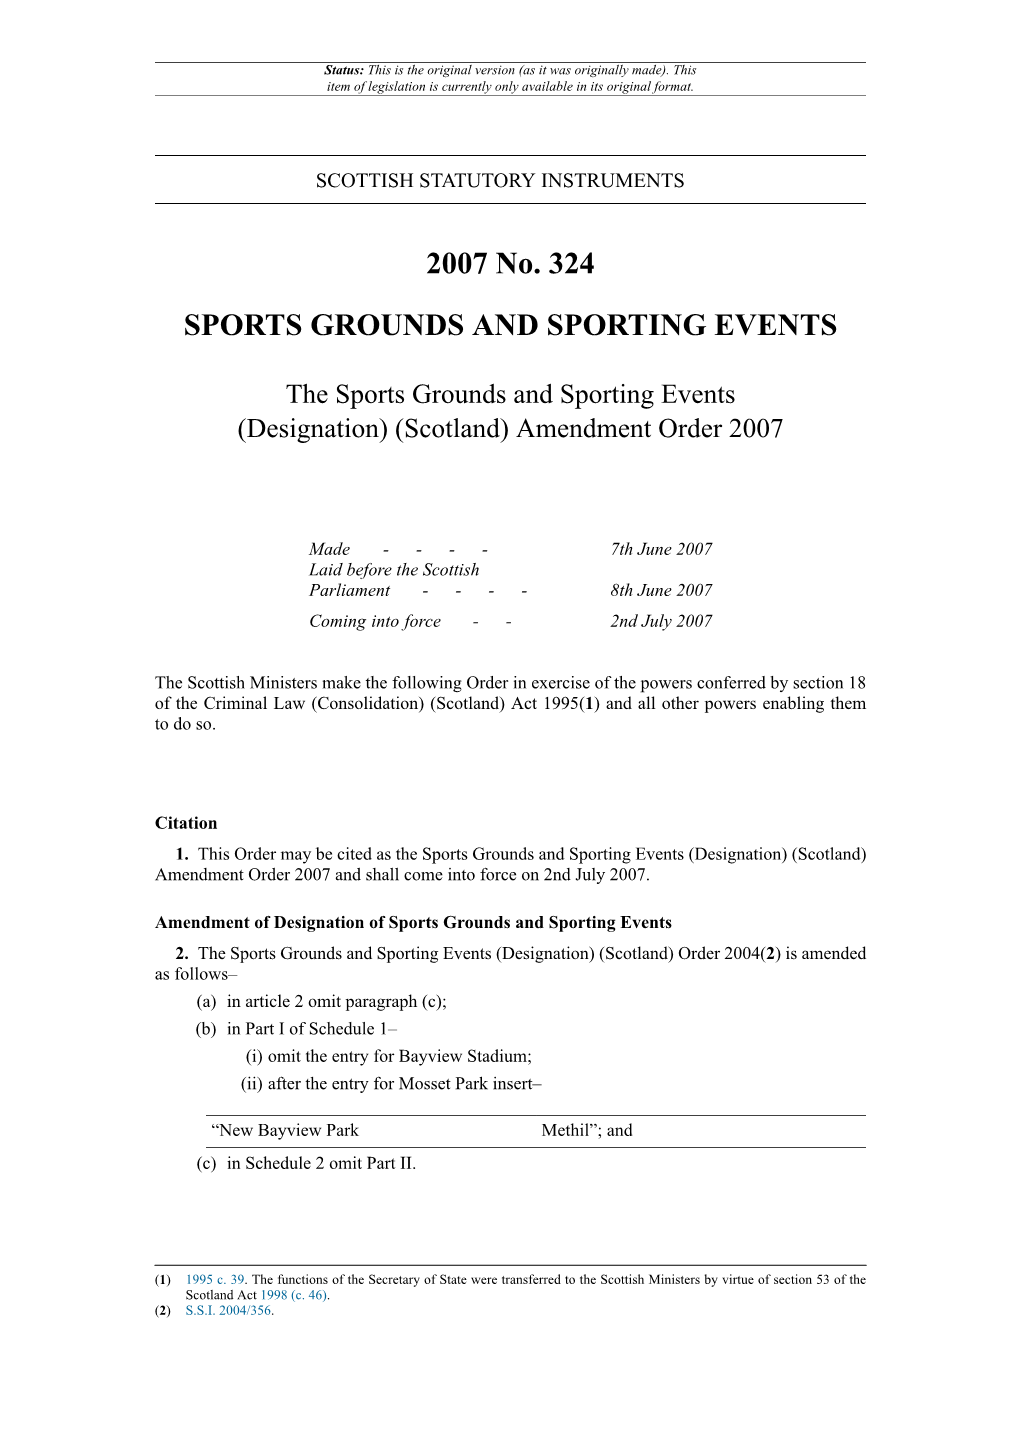 The Sports Grounds and Sporting Events (Designation) (Scotland) Amendment Order 2007